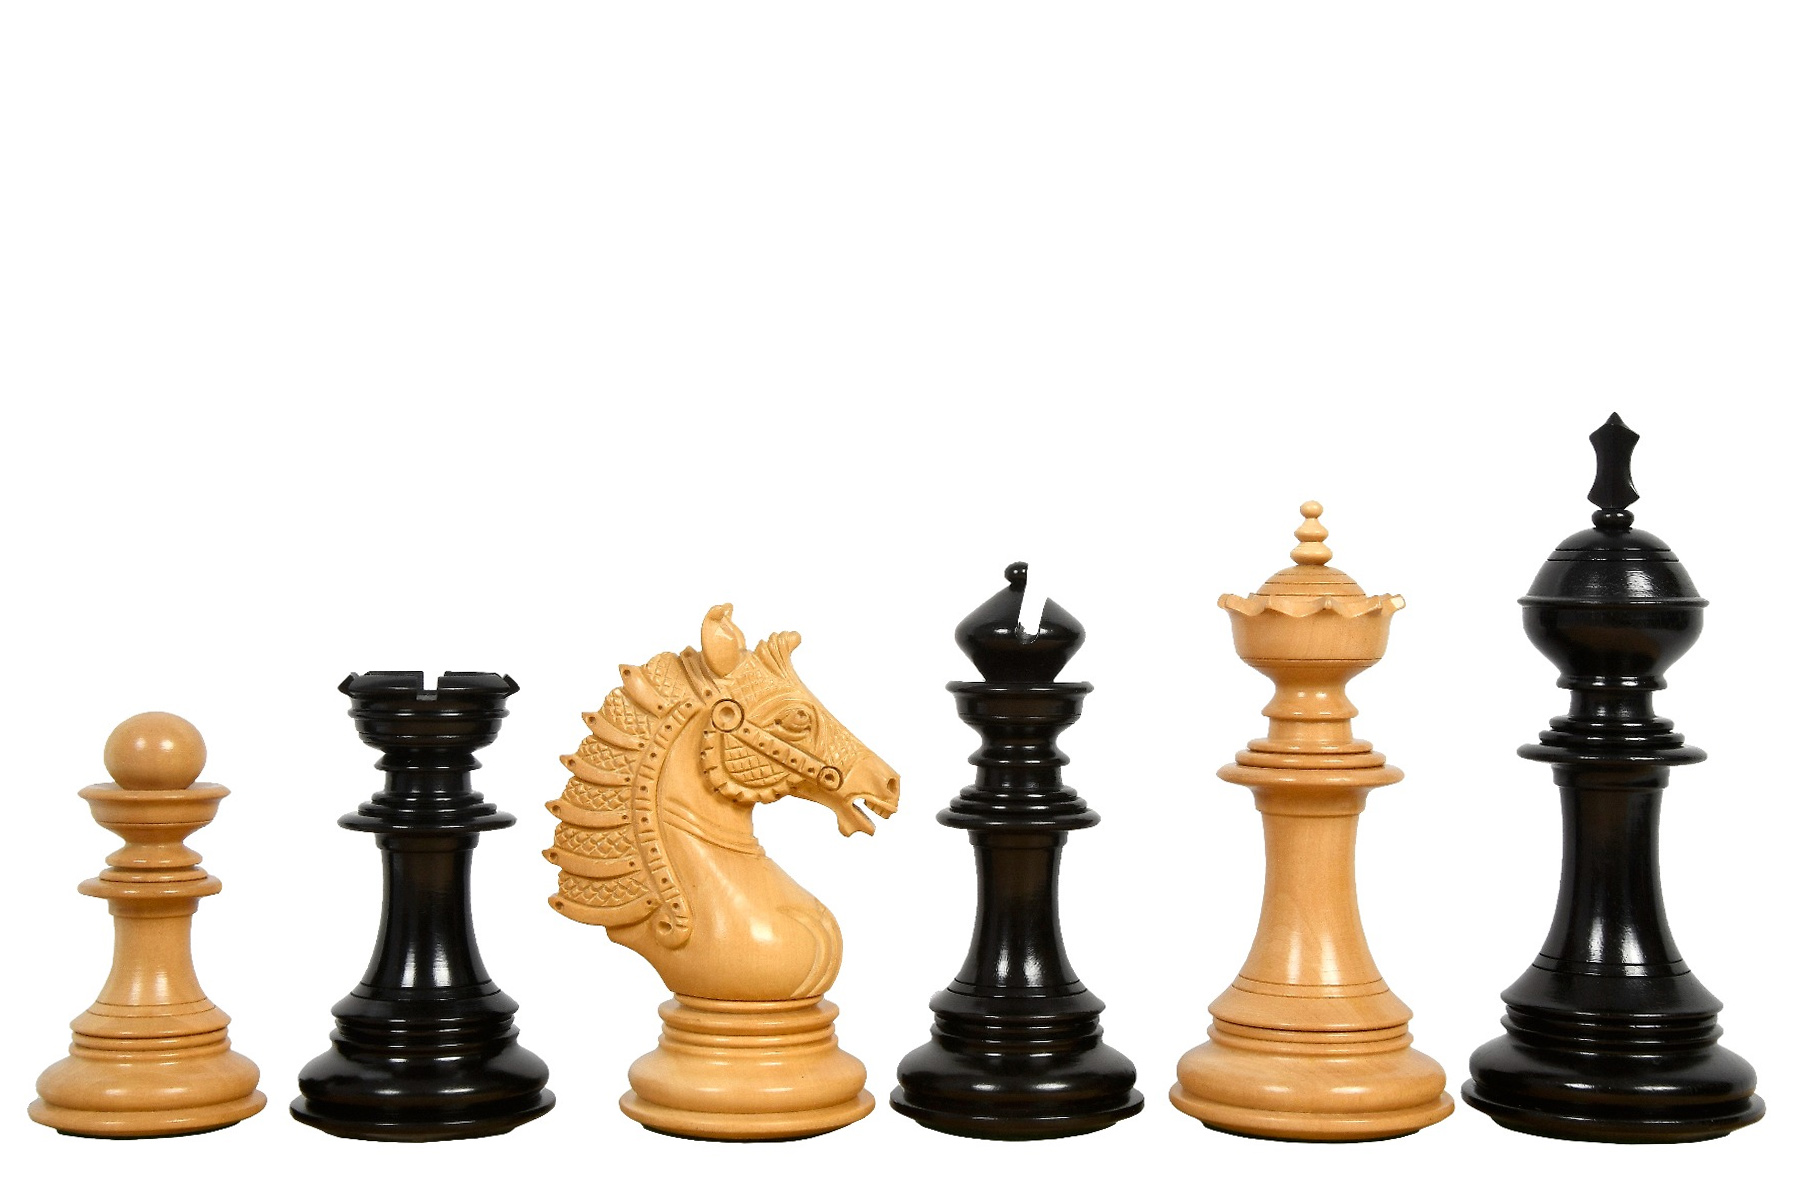 Ebony Wood Galaxy Staunton Wooden Chess Set Pieces King size 3" House of Chess 